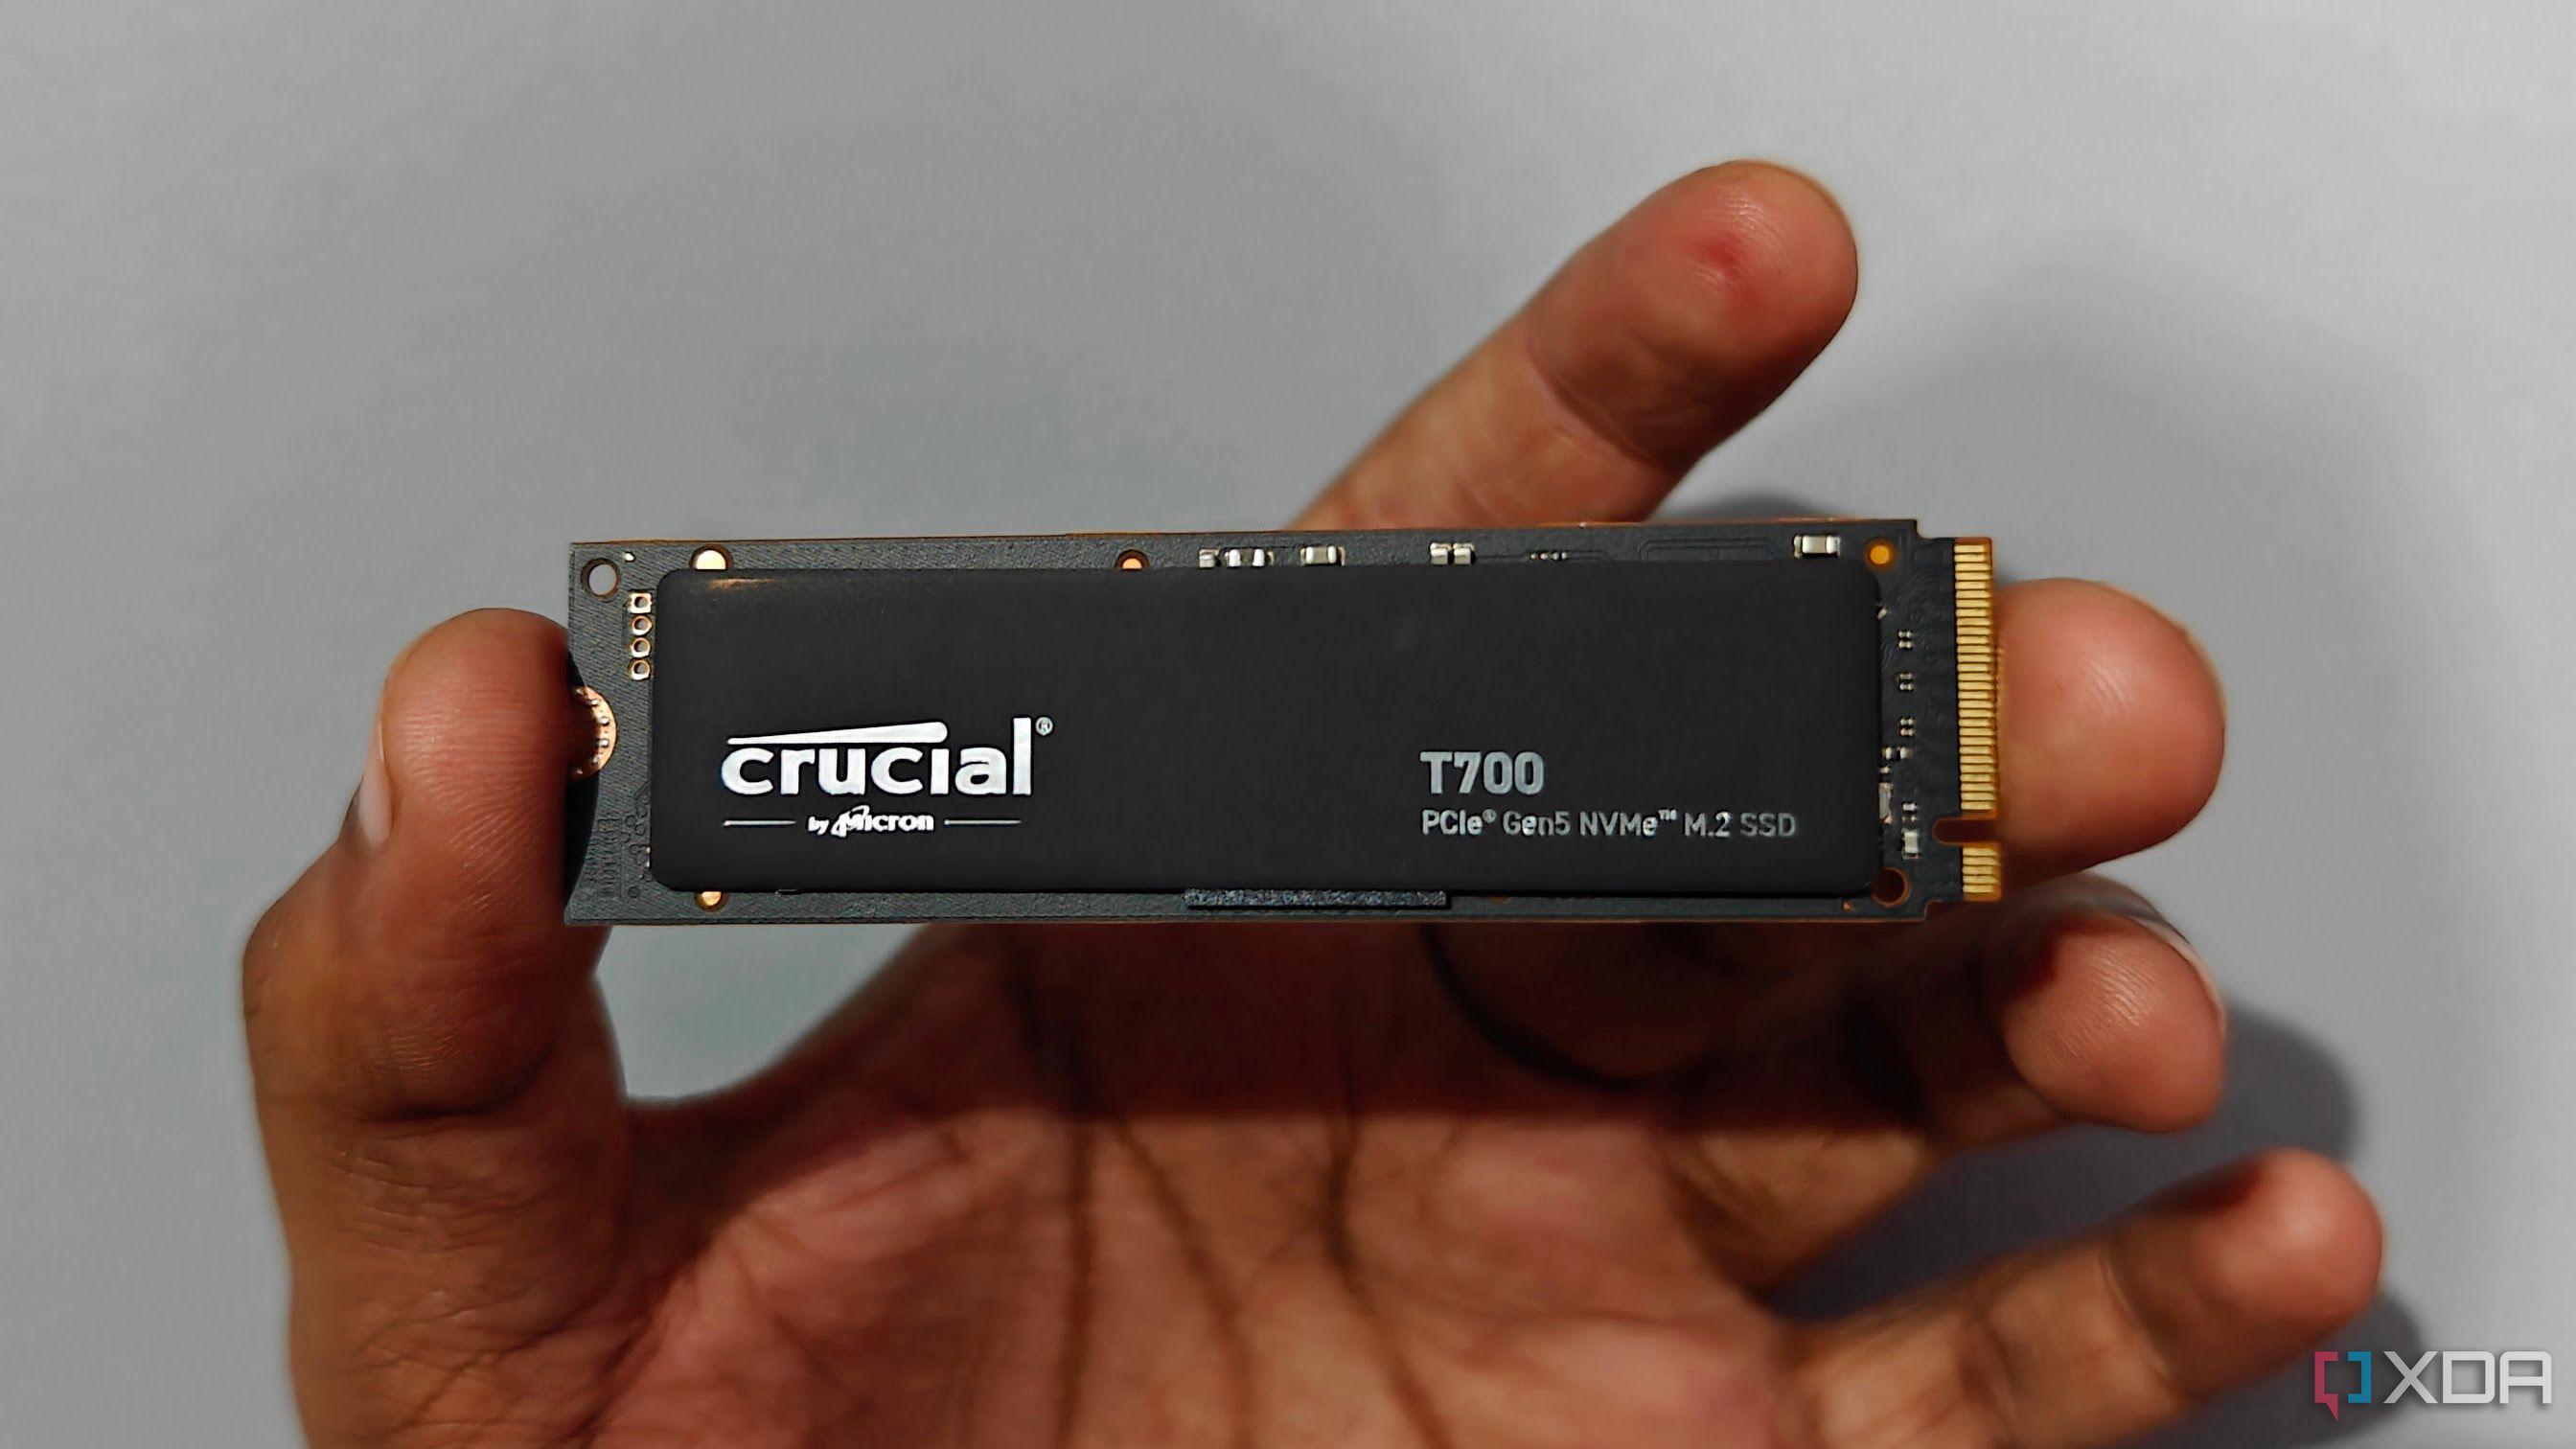 User holding the Crucial T700 SSD in hand